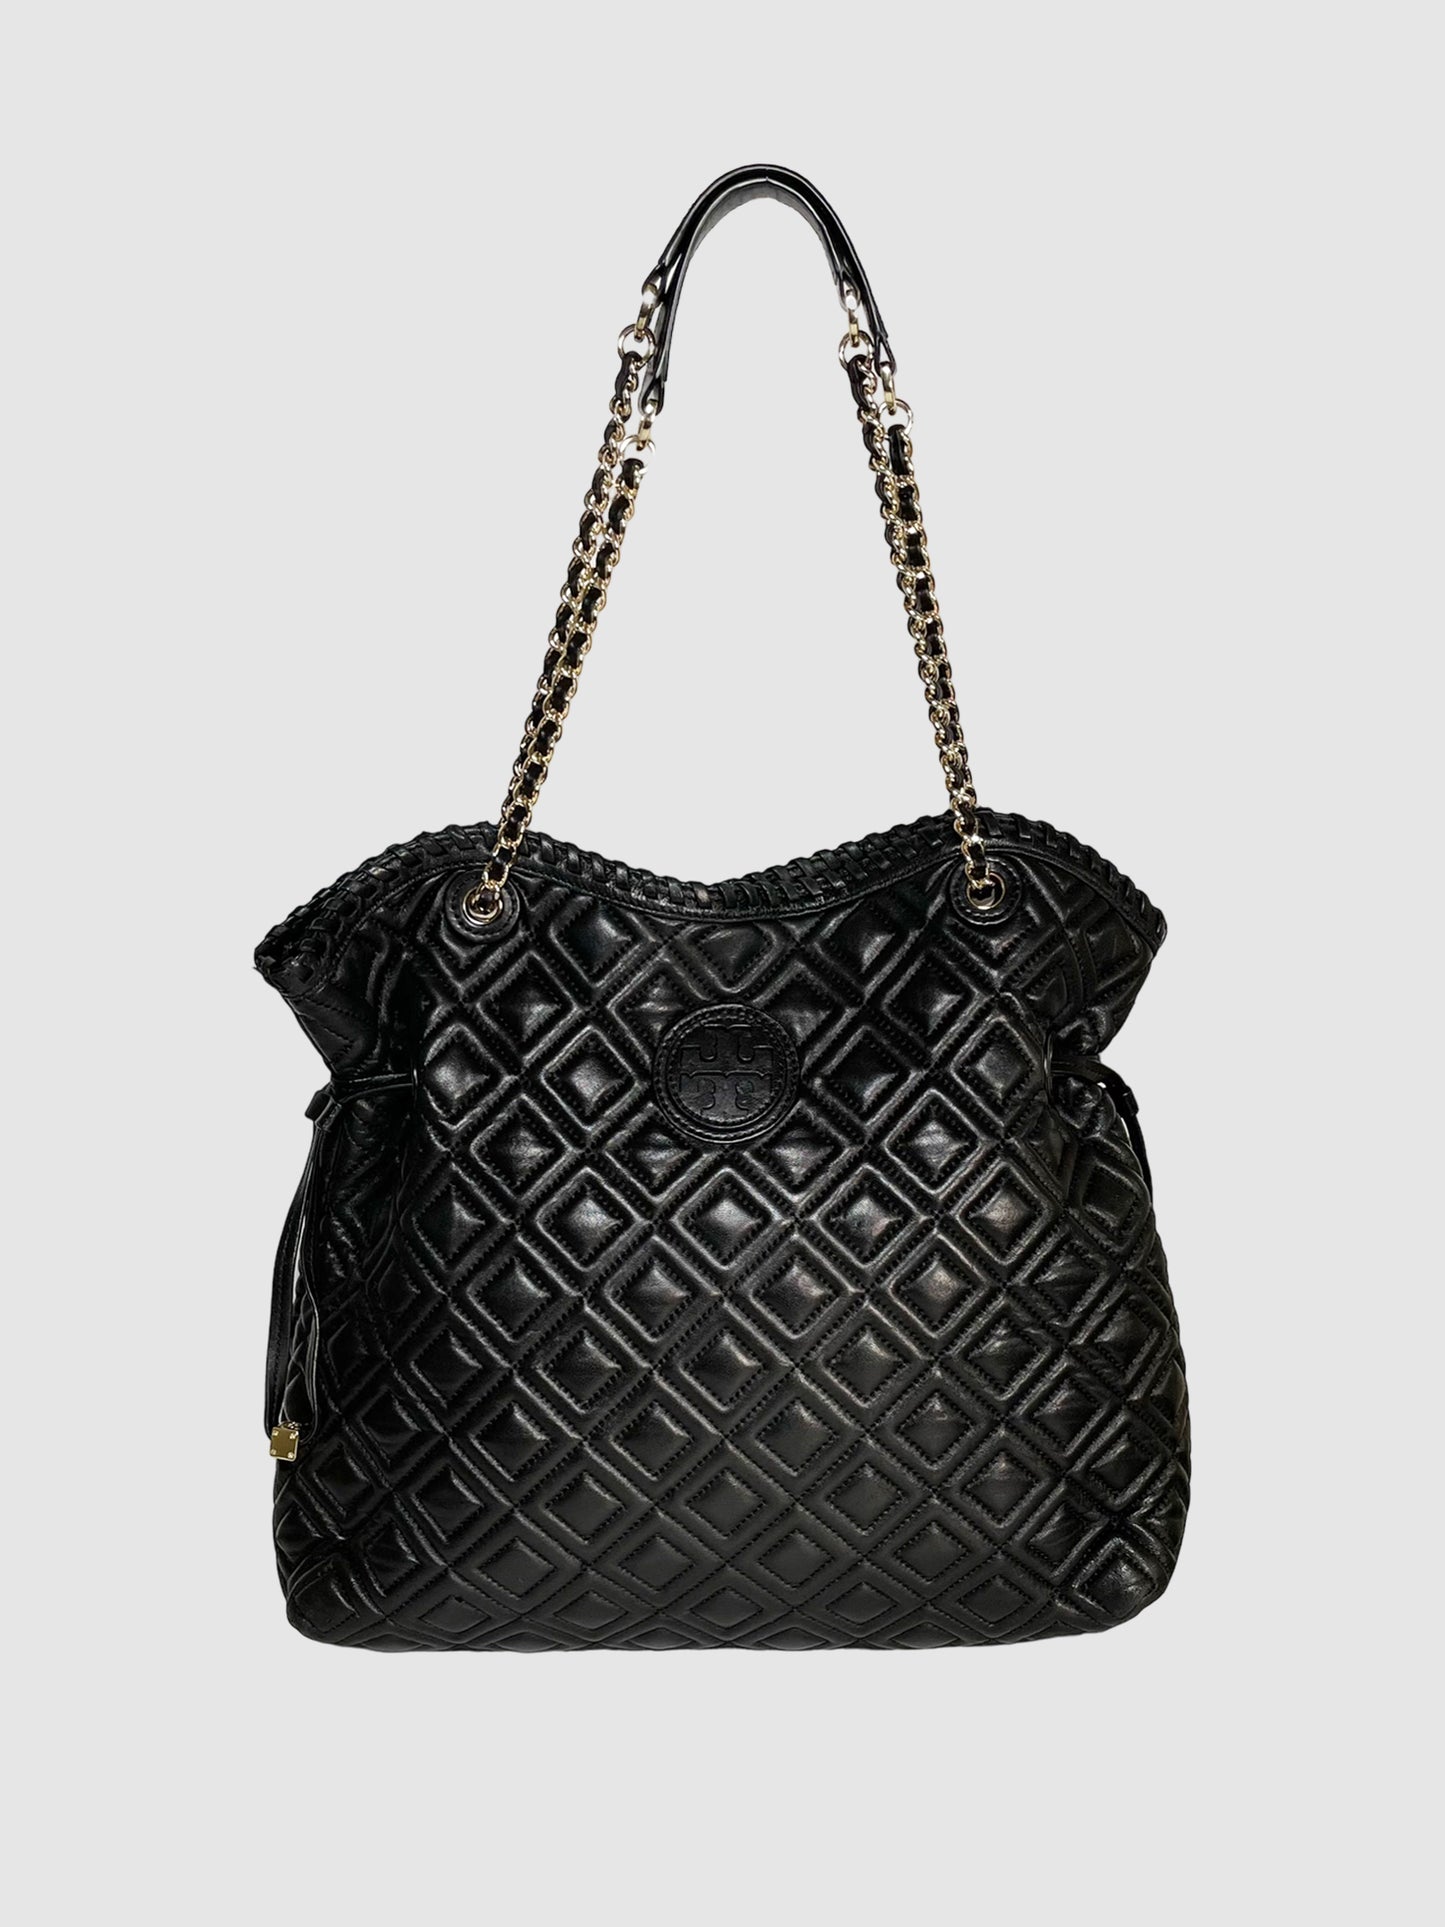 Tory Burch Marion Diamond Quilted Tote